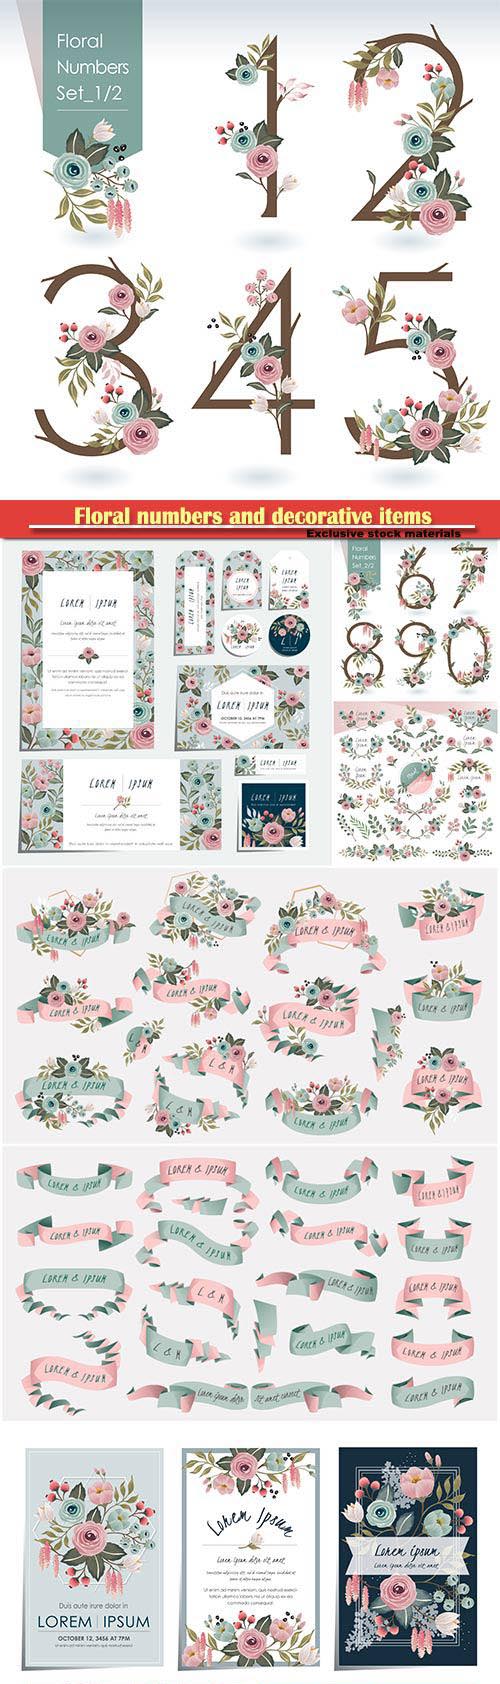 Floral numbers and decorative items for creativity